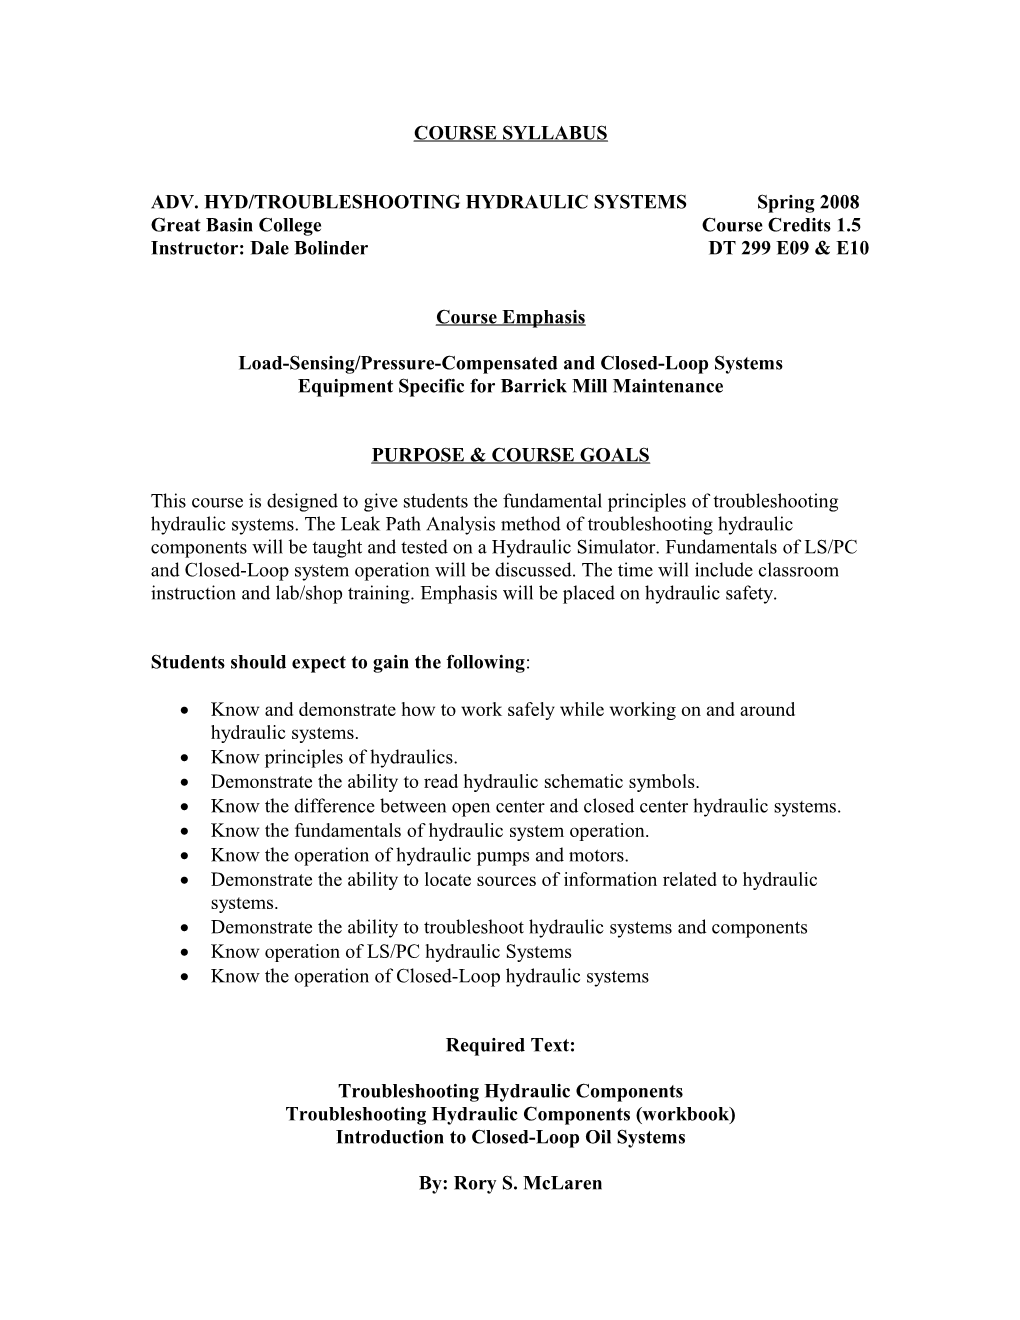 ADV. HYD/TROUBLESHOOTING HYDRAULIC SYSTEMS Spring 2008 Great Basincollege Course Credits 1.5